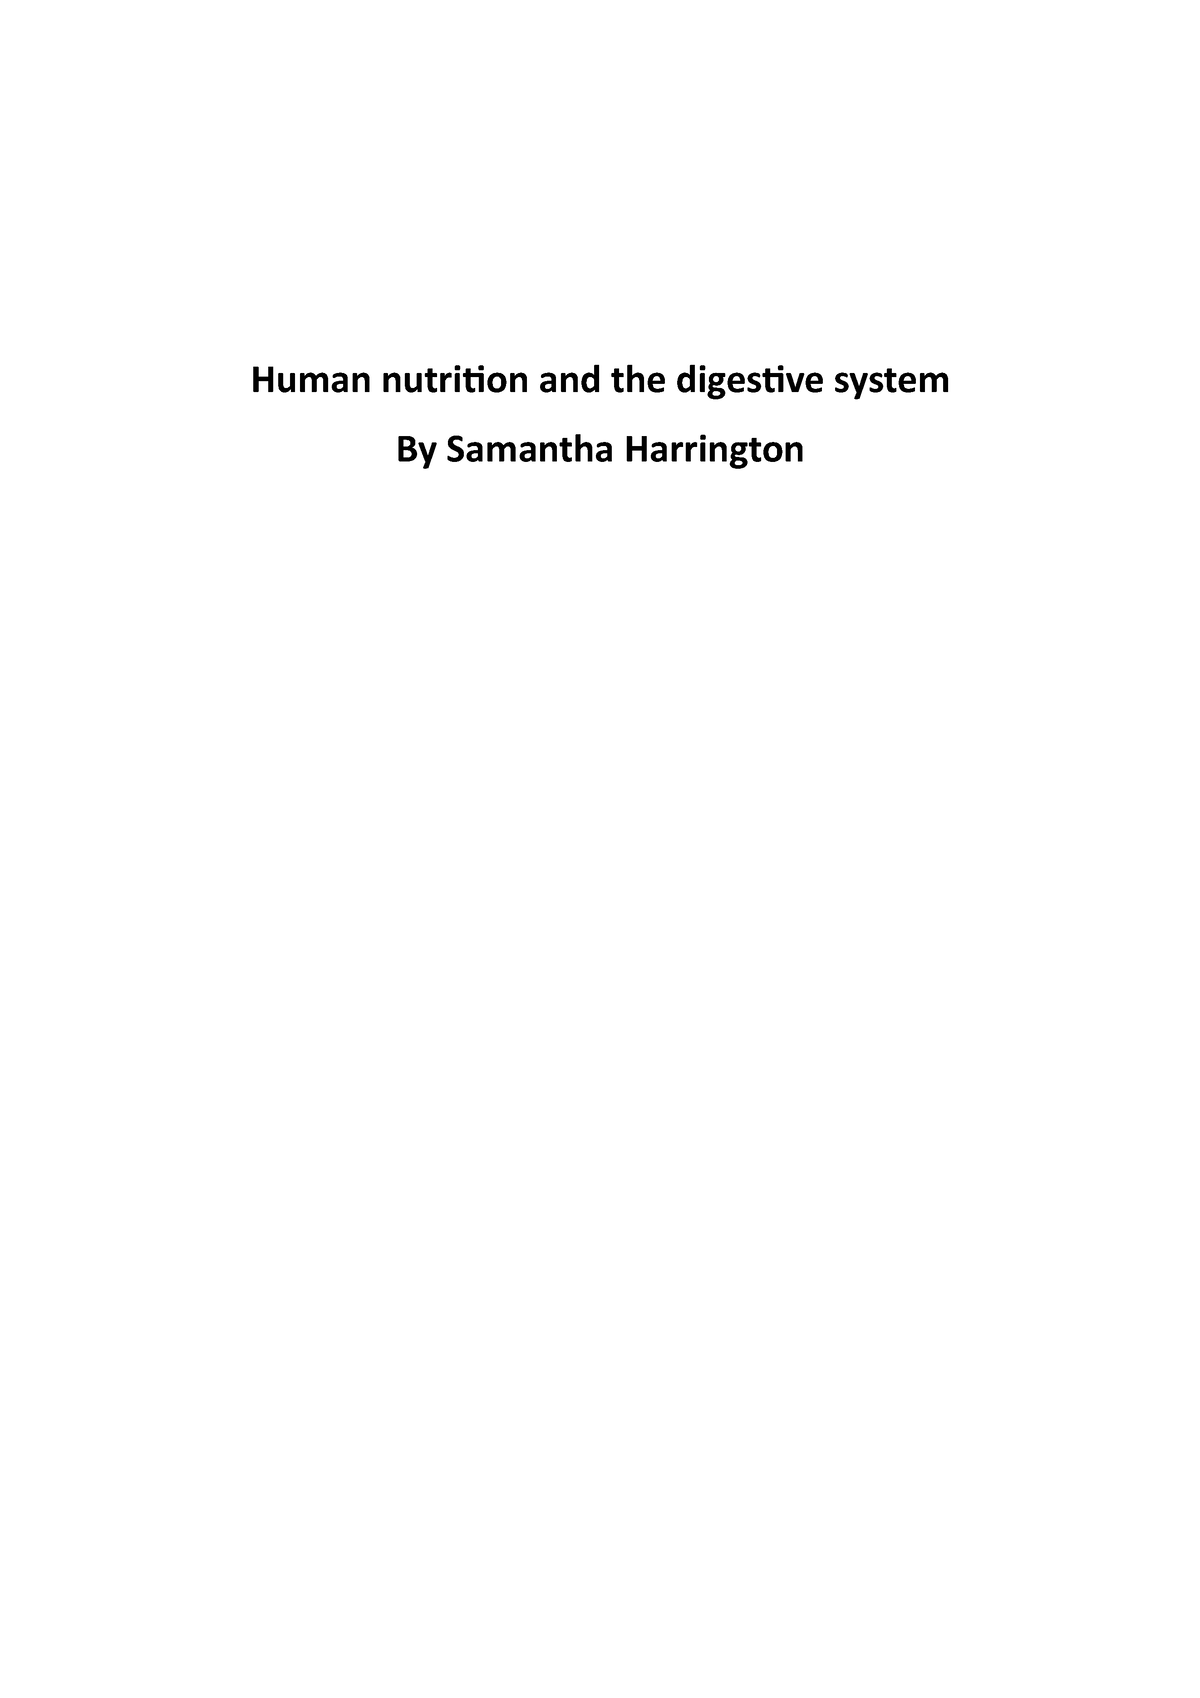 unit 9 human nutrition and the digestive system essay